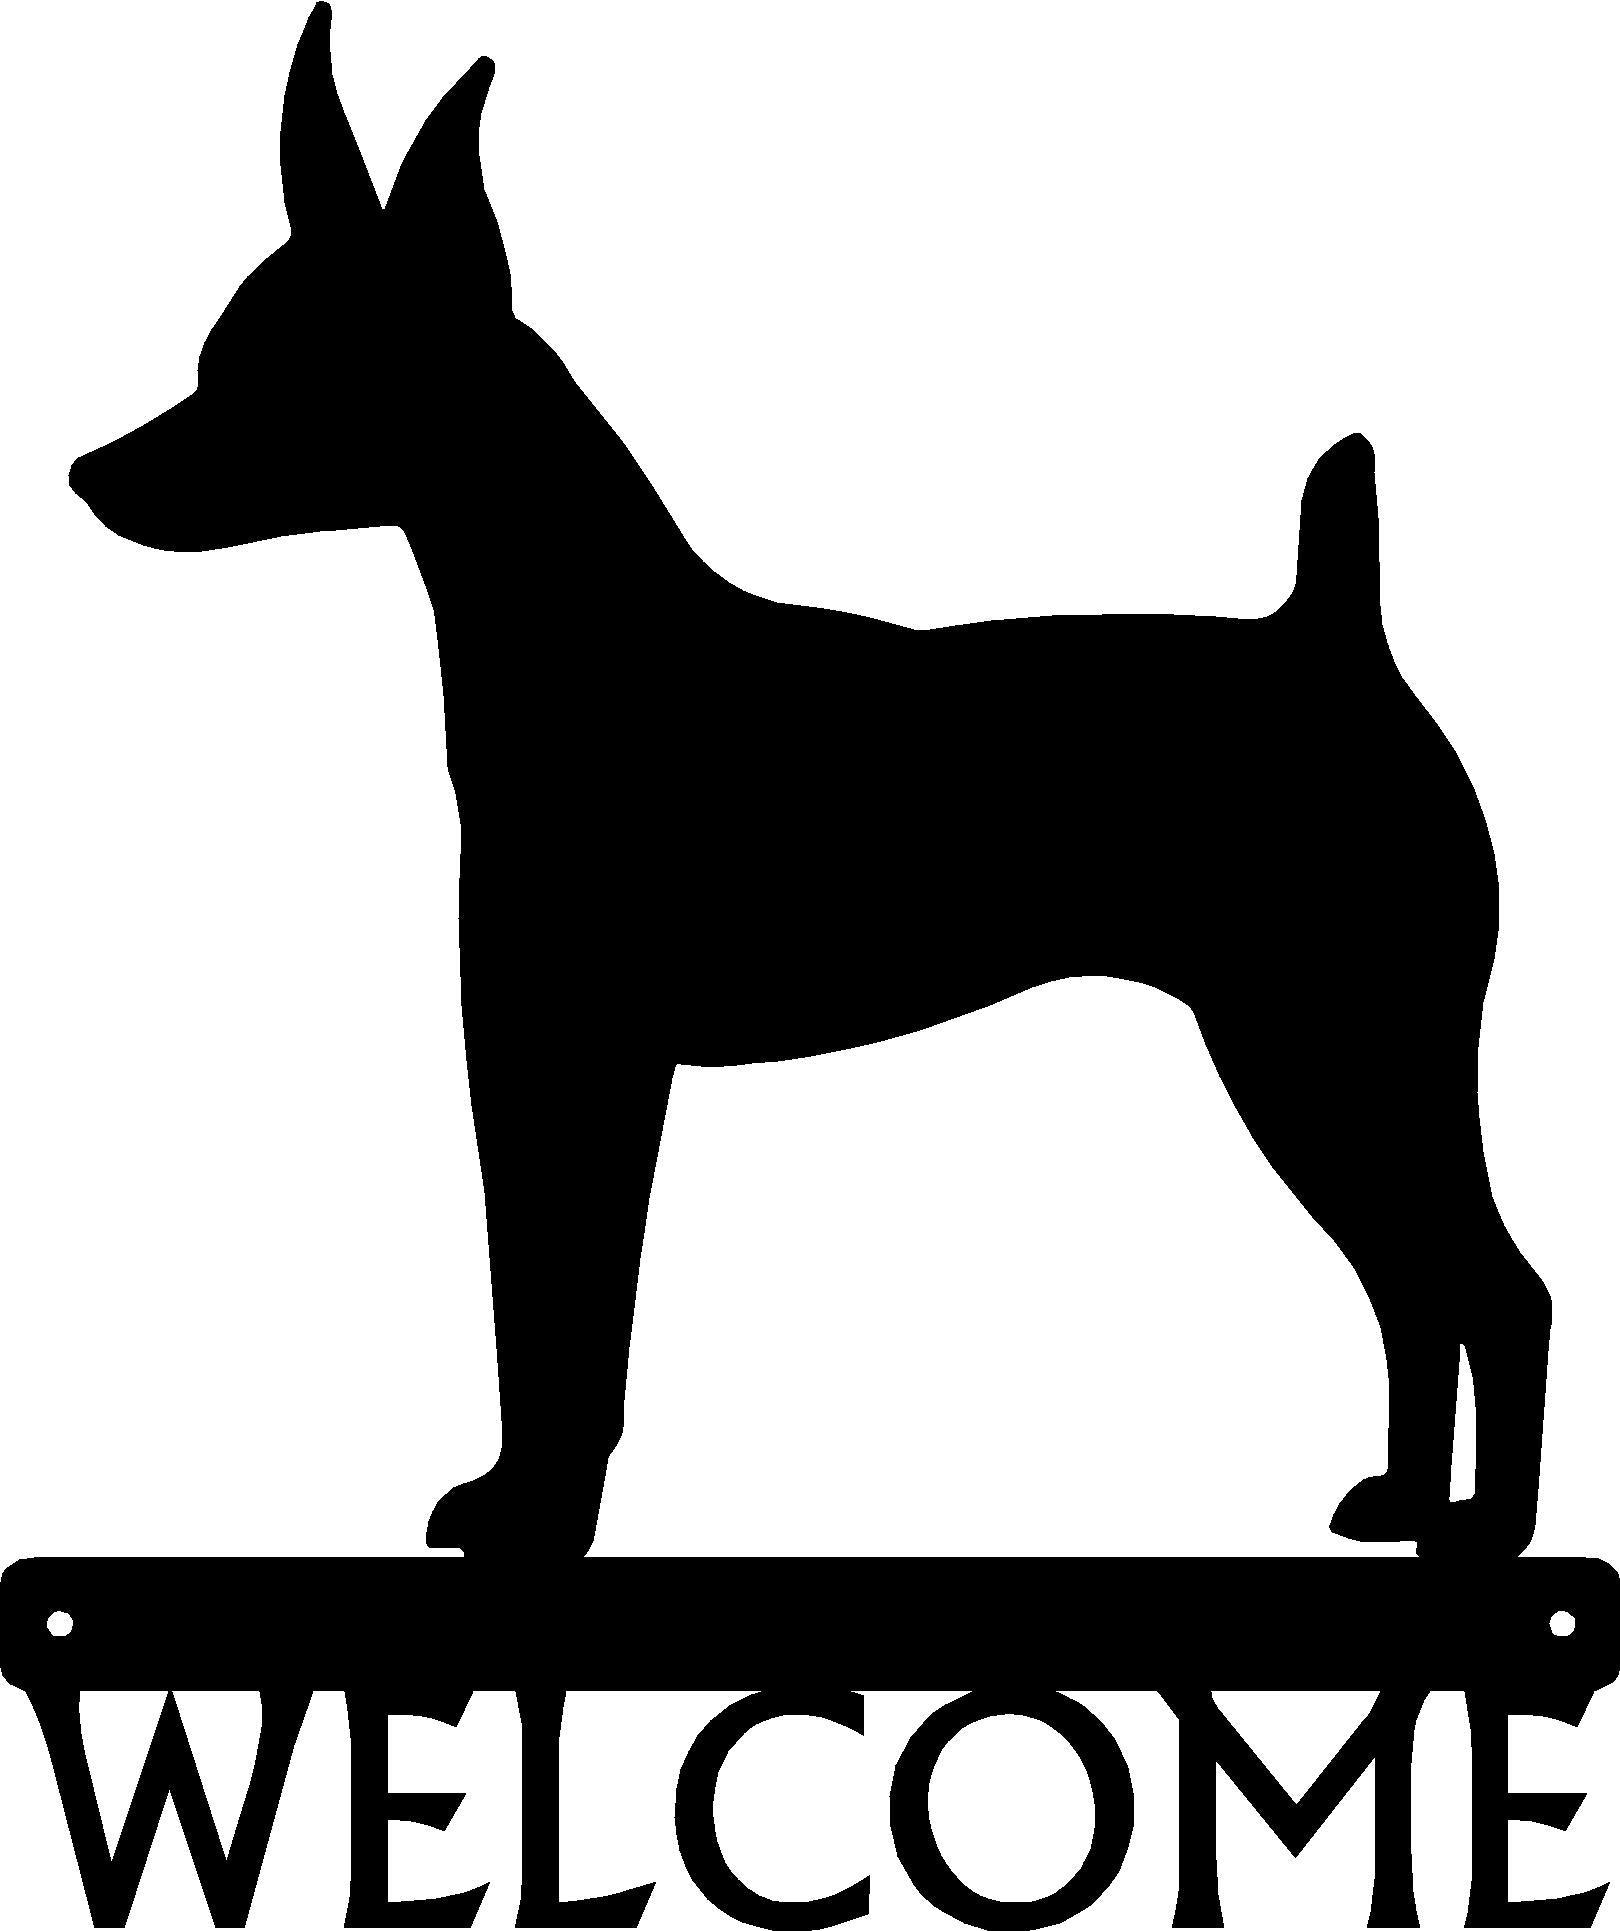 Toy Fox Terrier Dog Welcome Sign - The Metal Peddler Welcome Signs breed, Breed F, breed T, Dog, Name plaque, name sign, personalized, Personalized Gifts, Personalized Signs, personalizetext, porch, Toy Fox Terrier, welcome sign